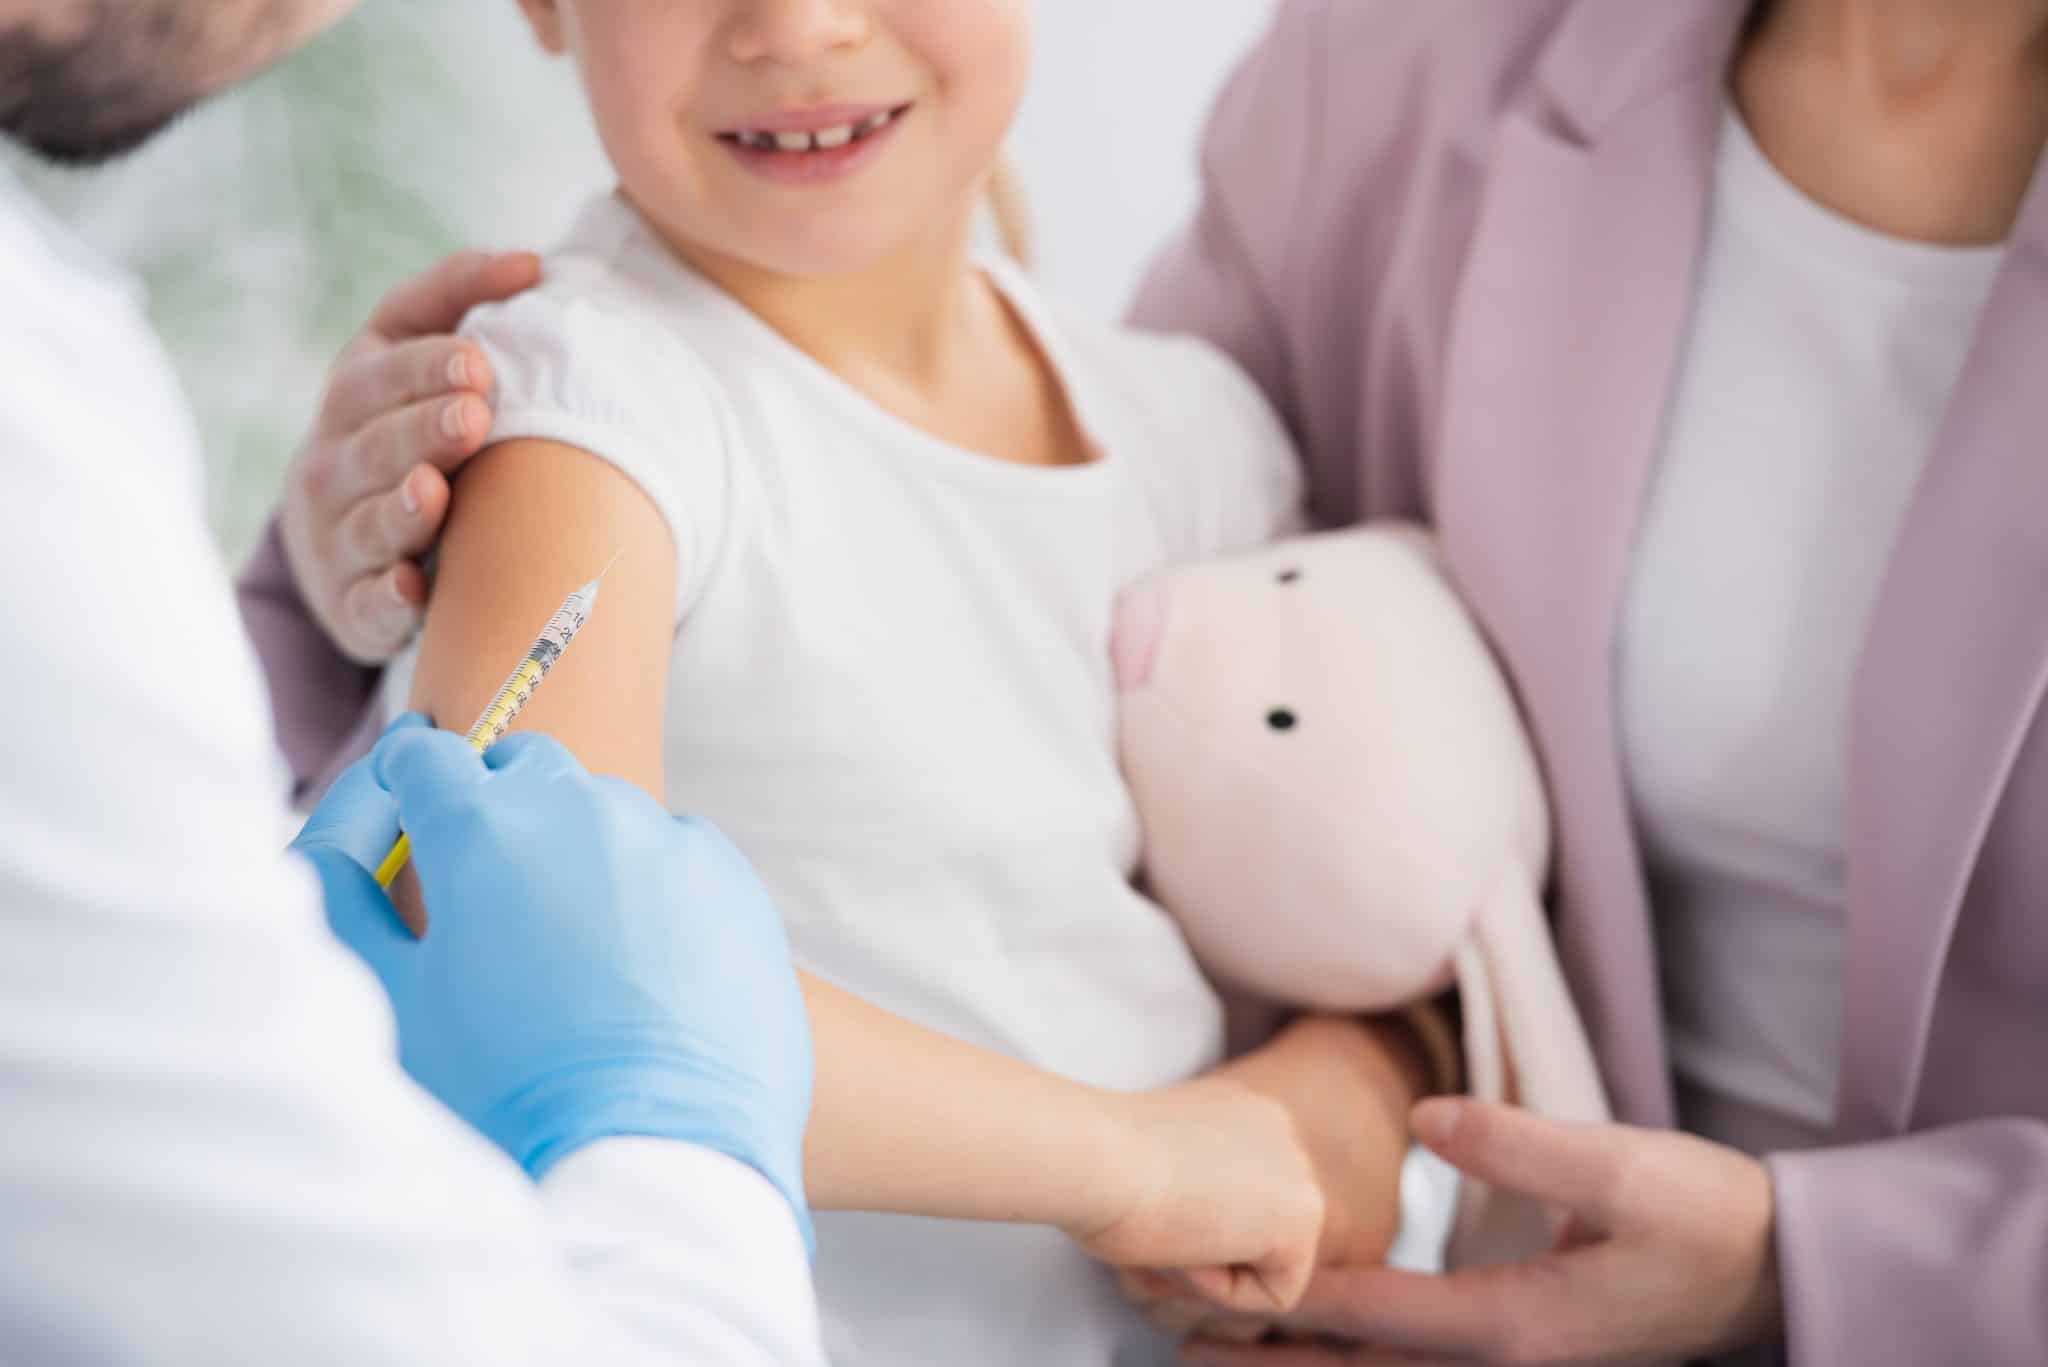 Doctor about to administer a vaccine to a child holding their mother and a stuffed animal